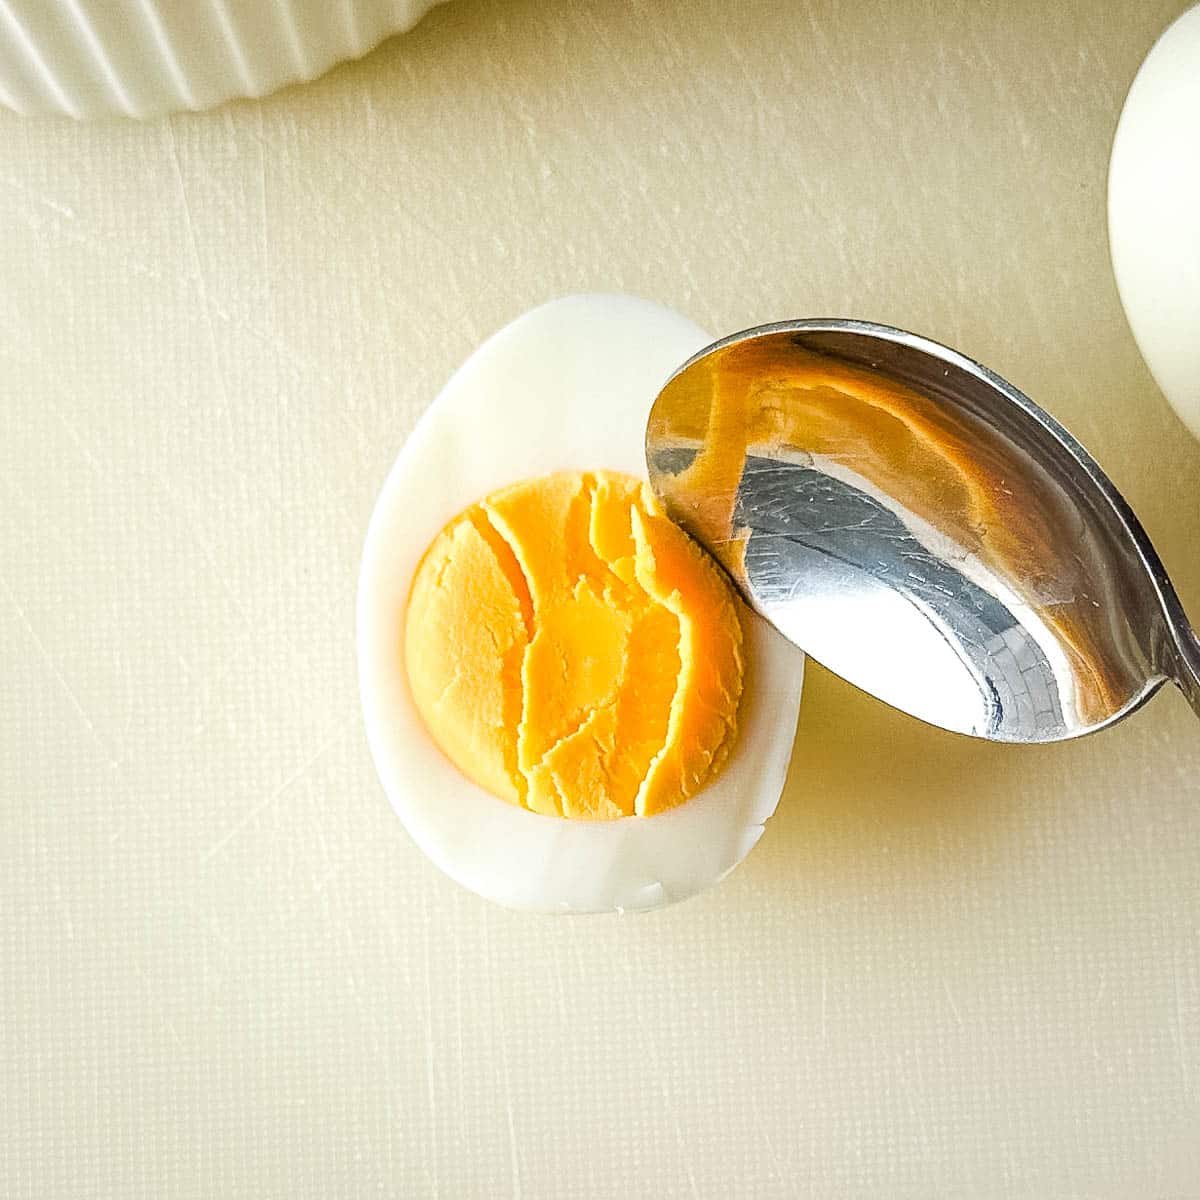 Removing yolk from hard-boiled egg with spooon.